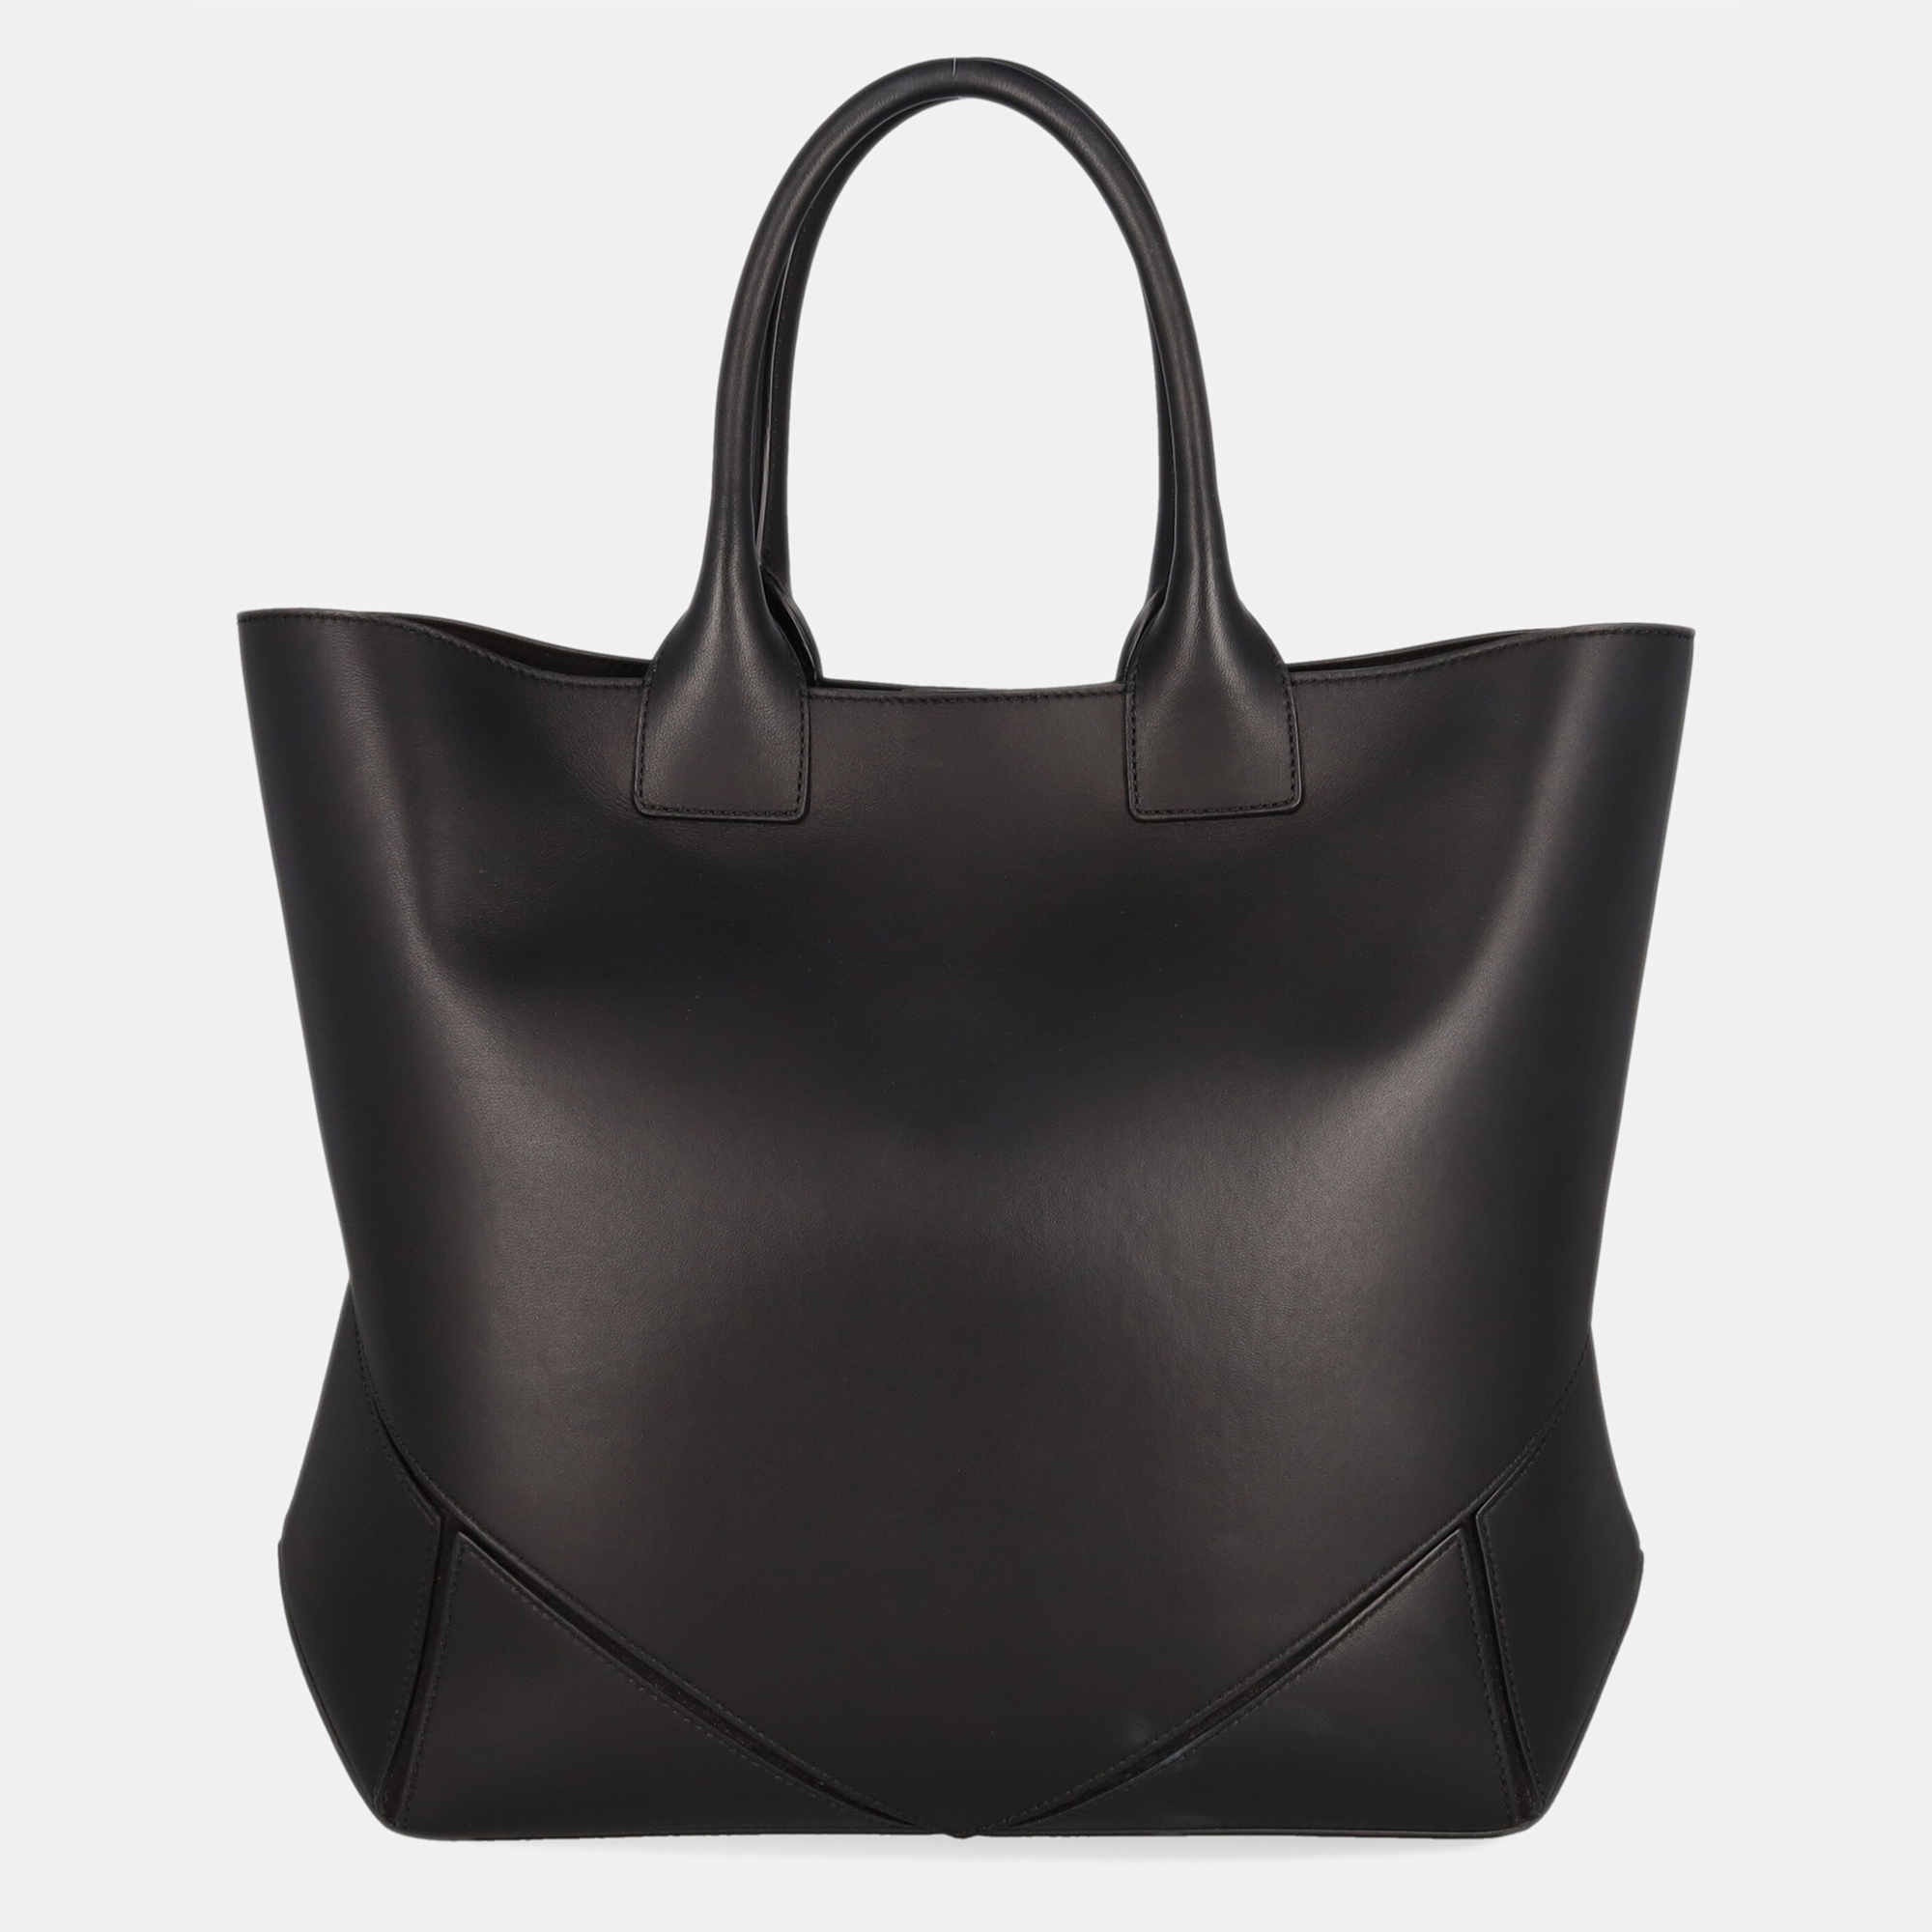 Givenchy  Women's Leather Tote Bag - Black - One Size